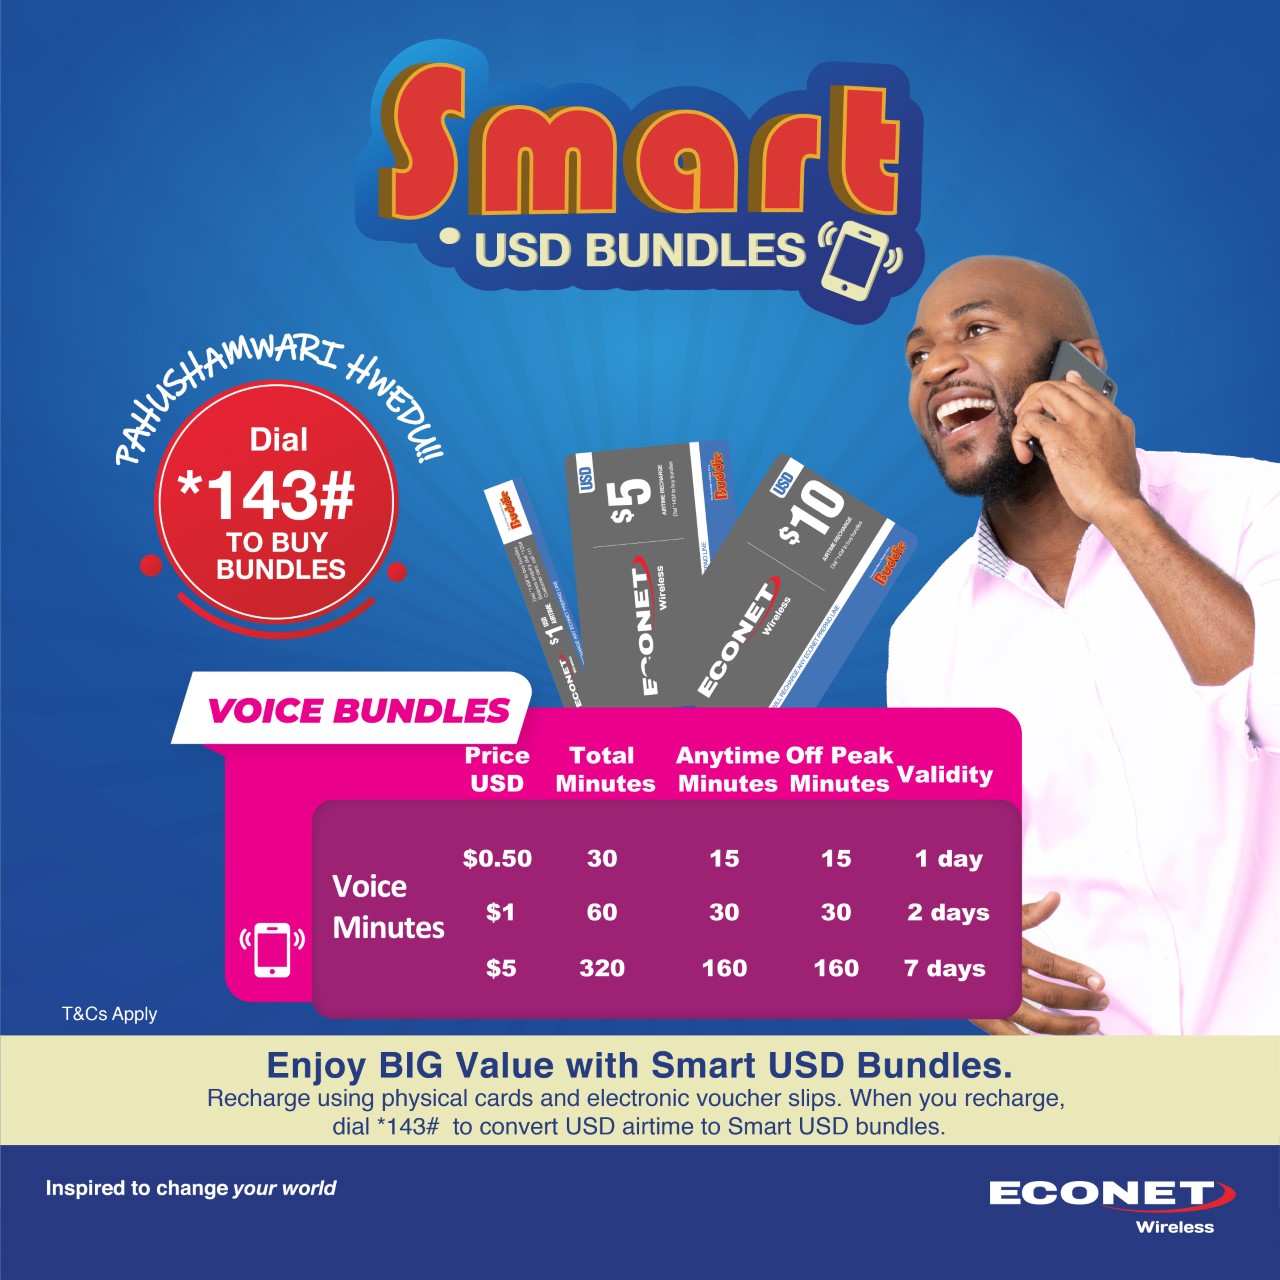 econet-wireless-on-twitter-enjoy-more-value-on-calls-with-the-voice